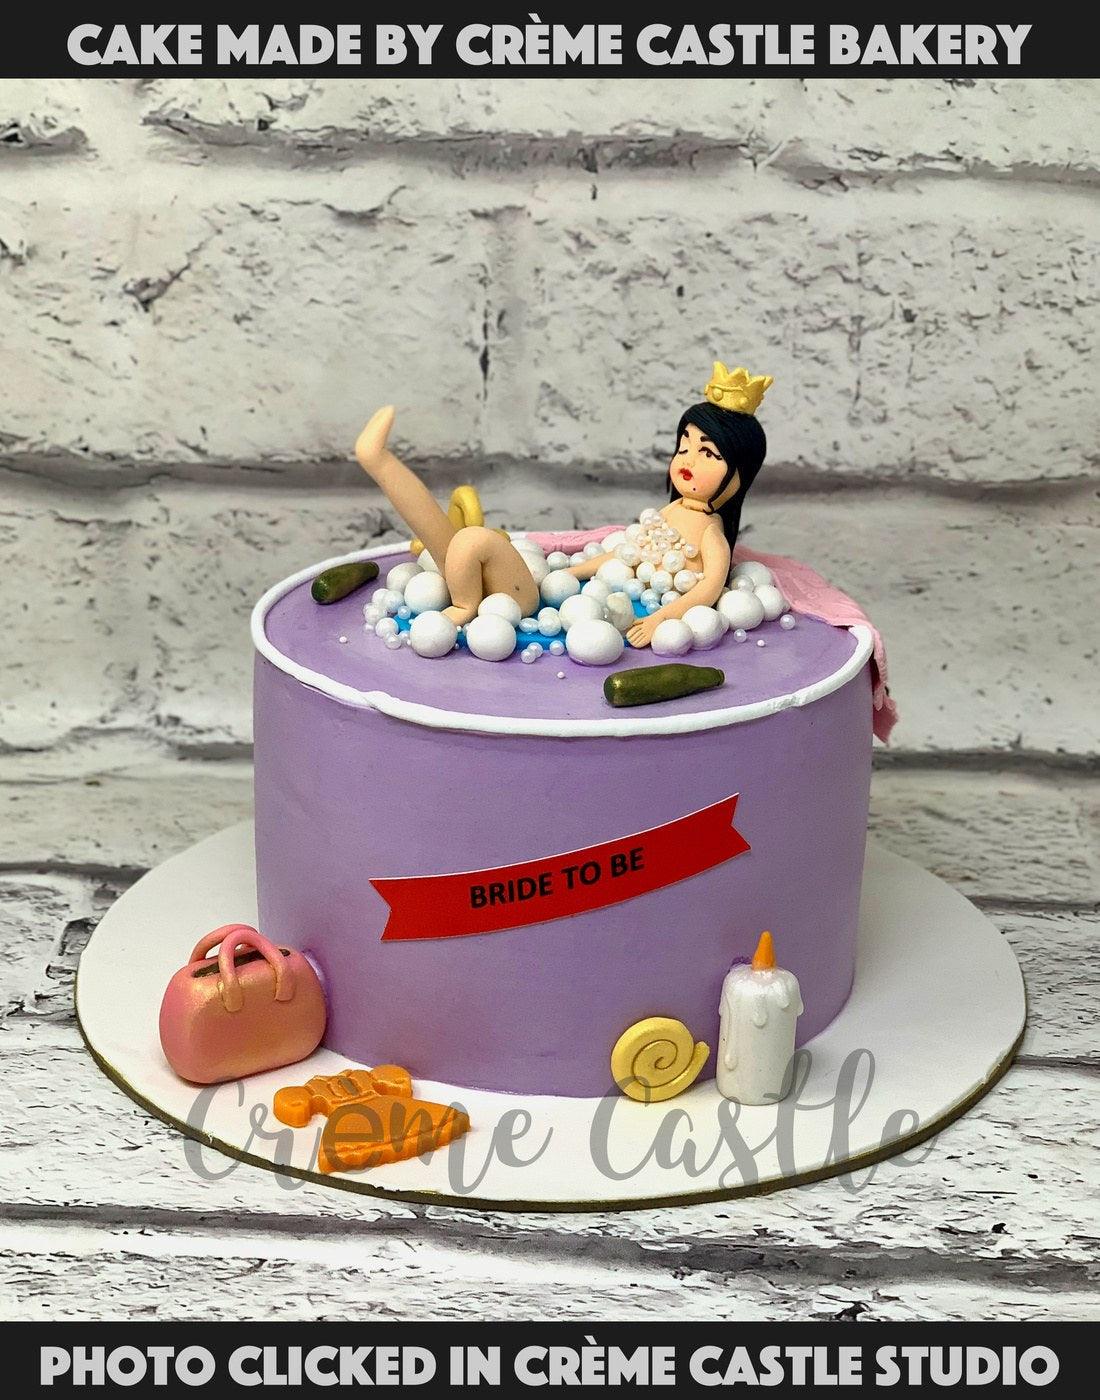 Bride To Be Cake in Purple by Creme Castle